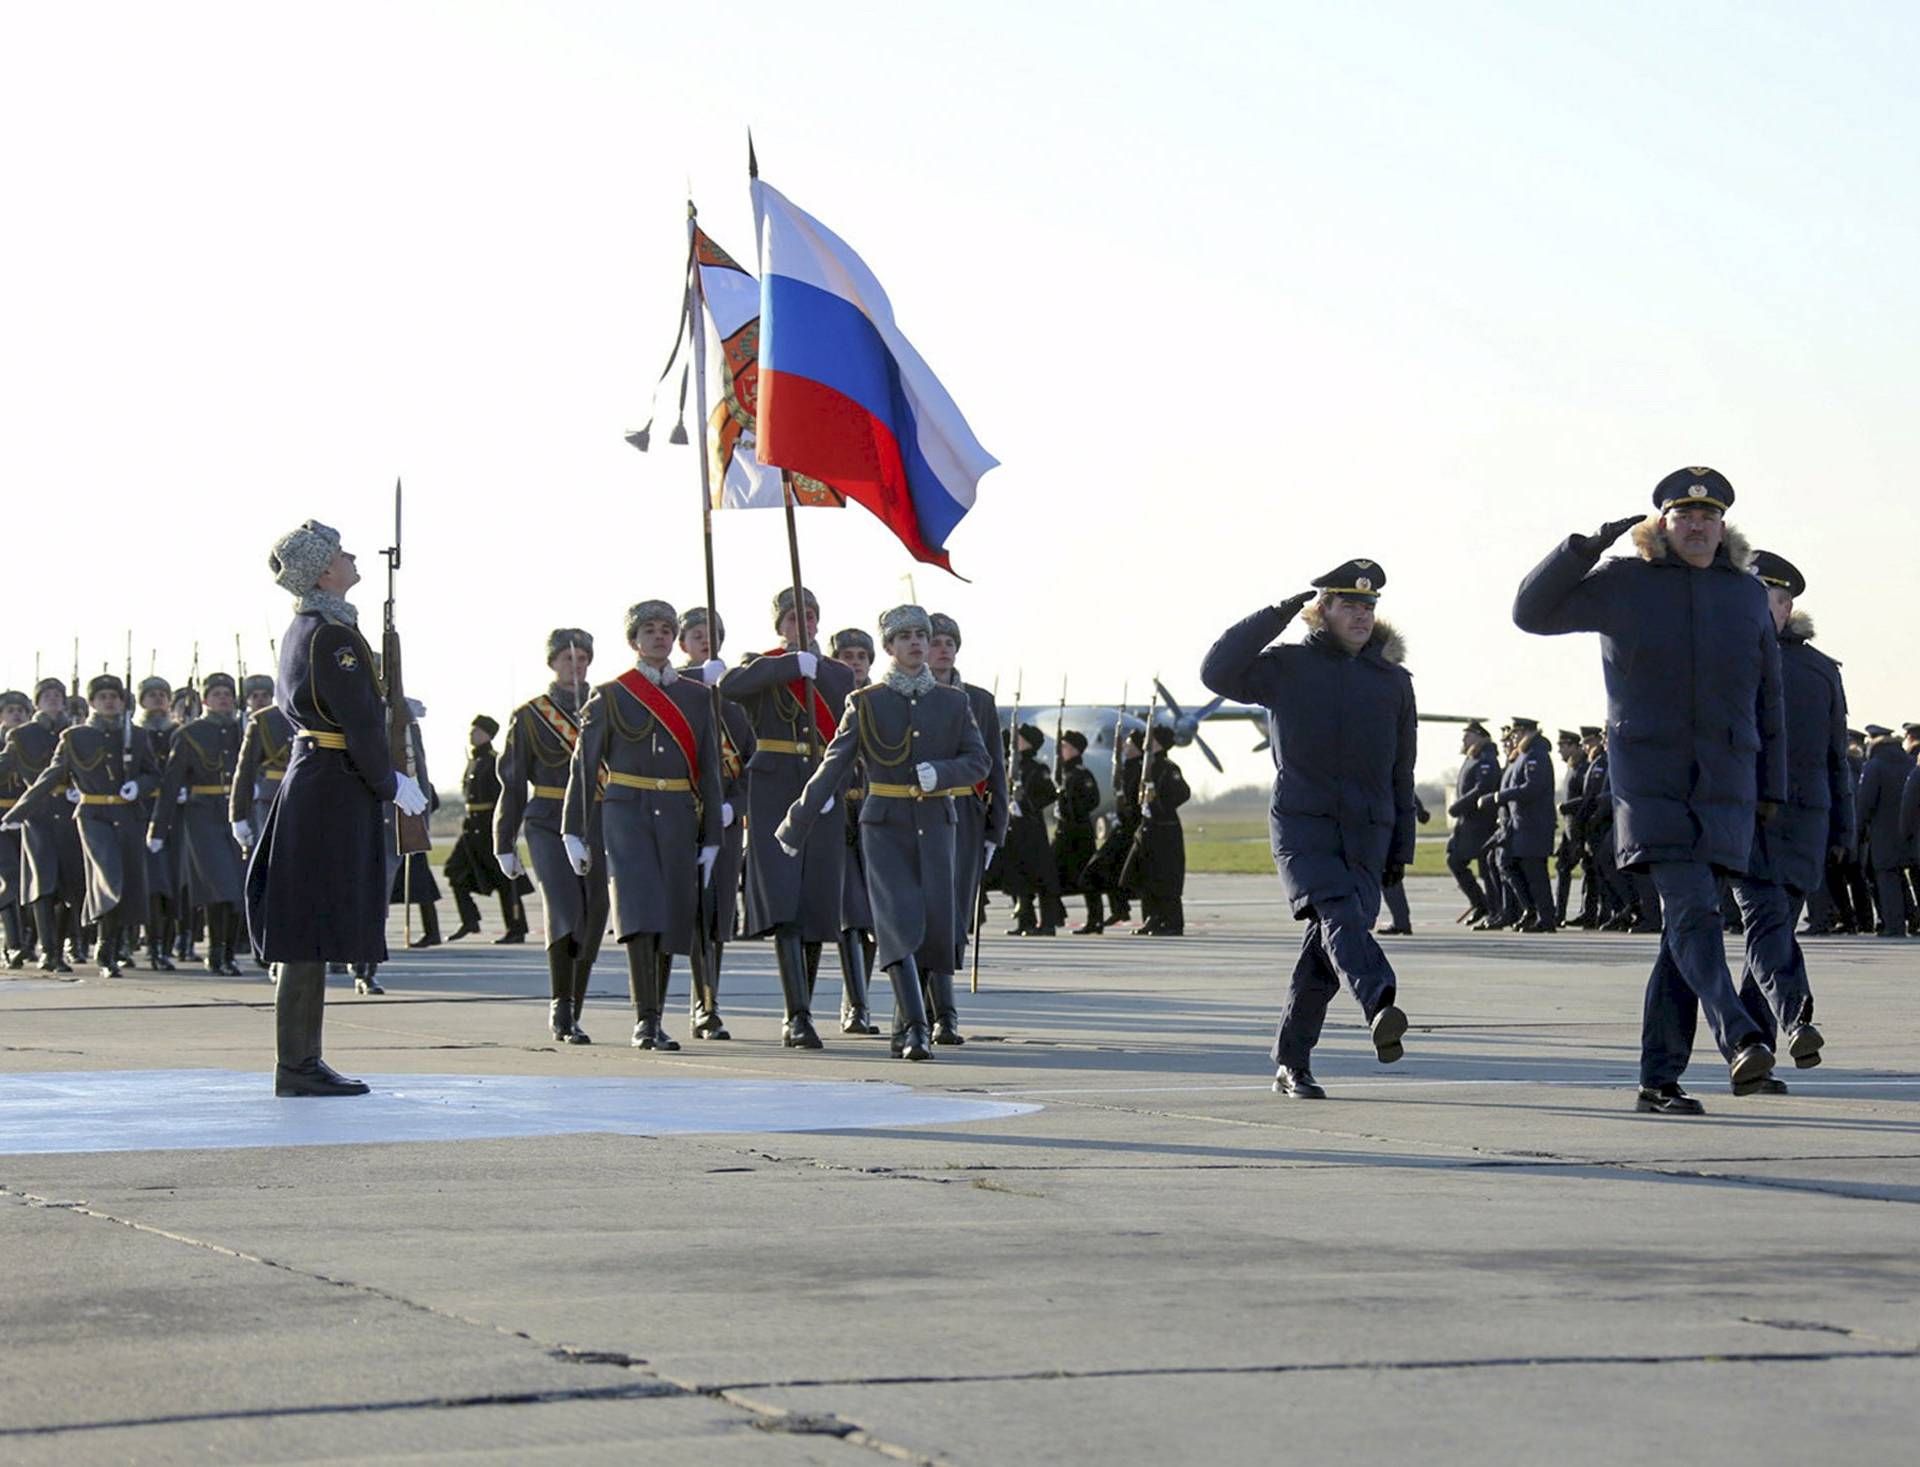 Russian Ministry of Defence handout photo shows servicemen taking part in a ceremony to welcome Russian military aircraft and pilots after they arrived from Syria, at an airbase in Krasnodar region, southern Russia